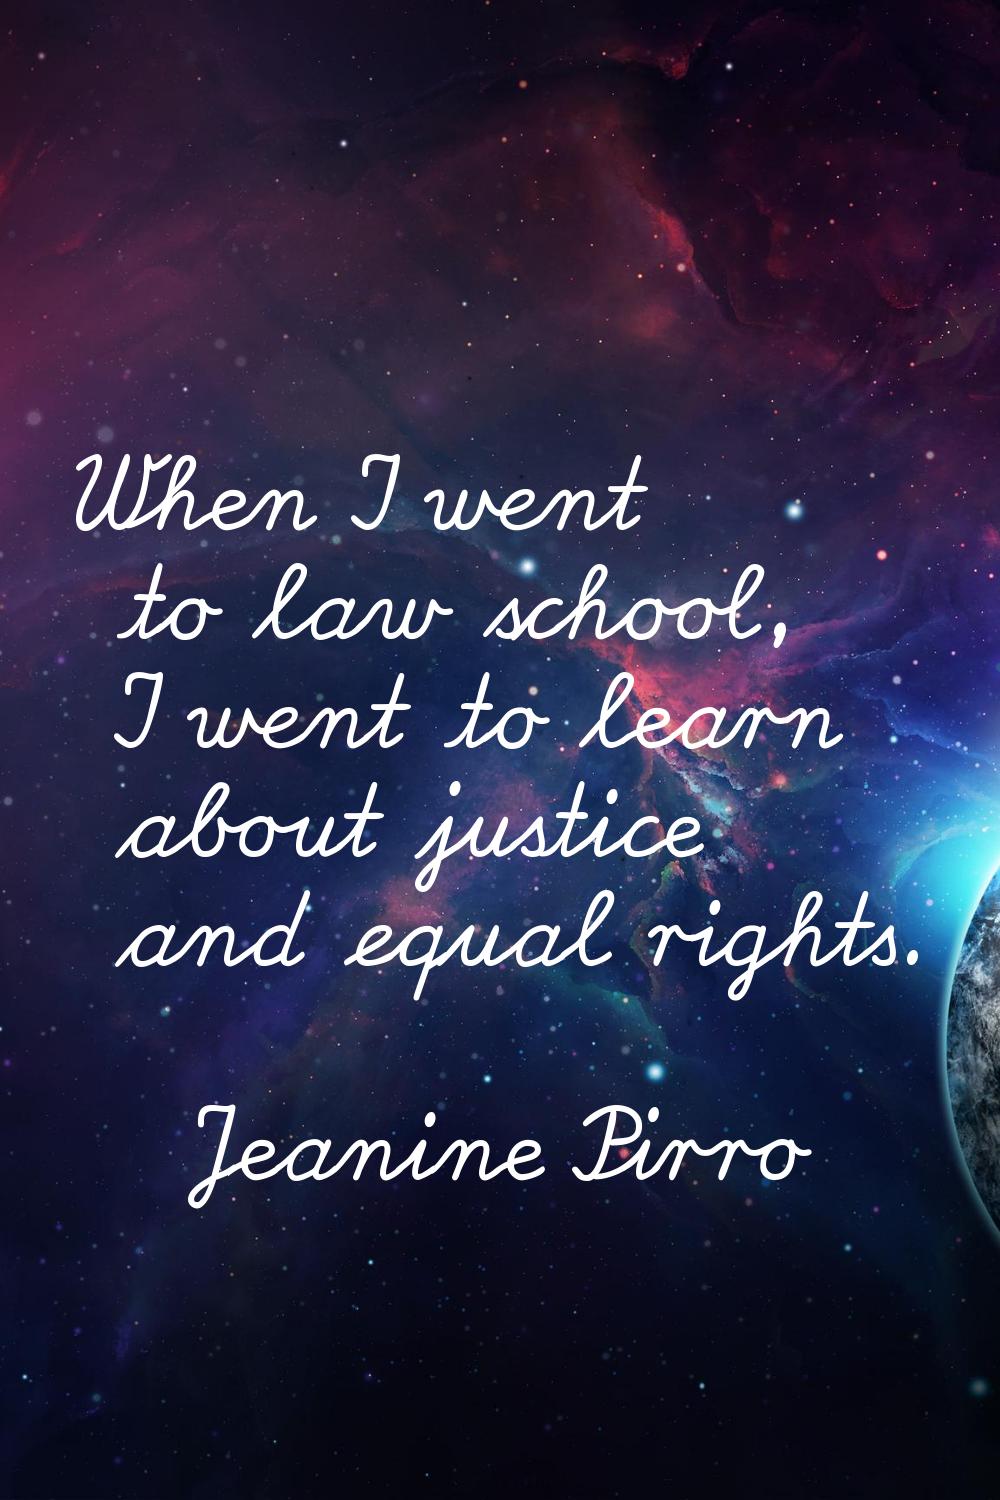 When I went to law school, I went to learn about justice and equal rights.